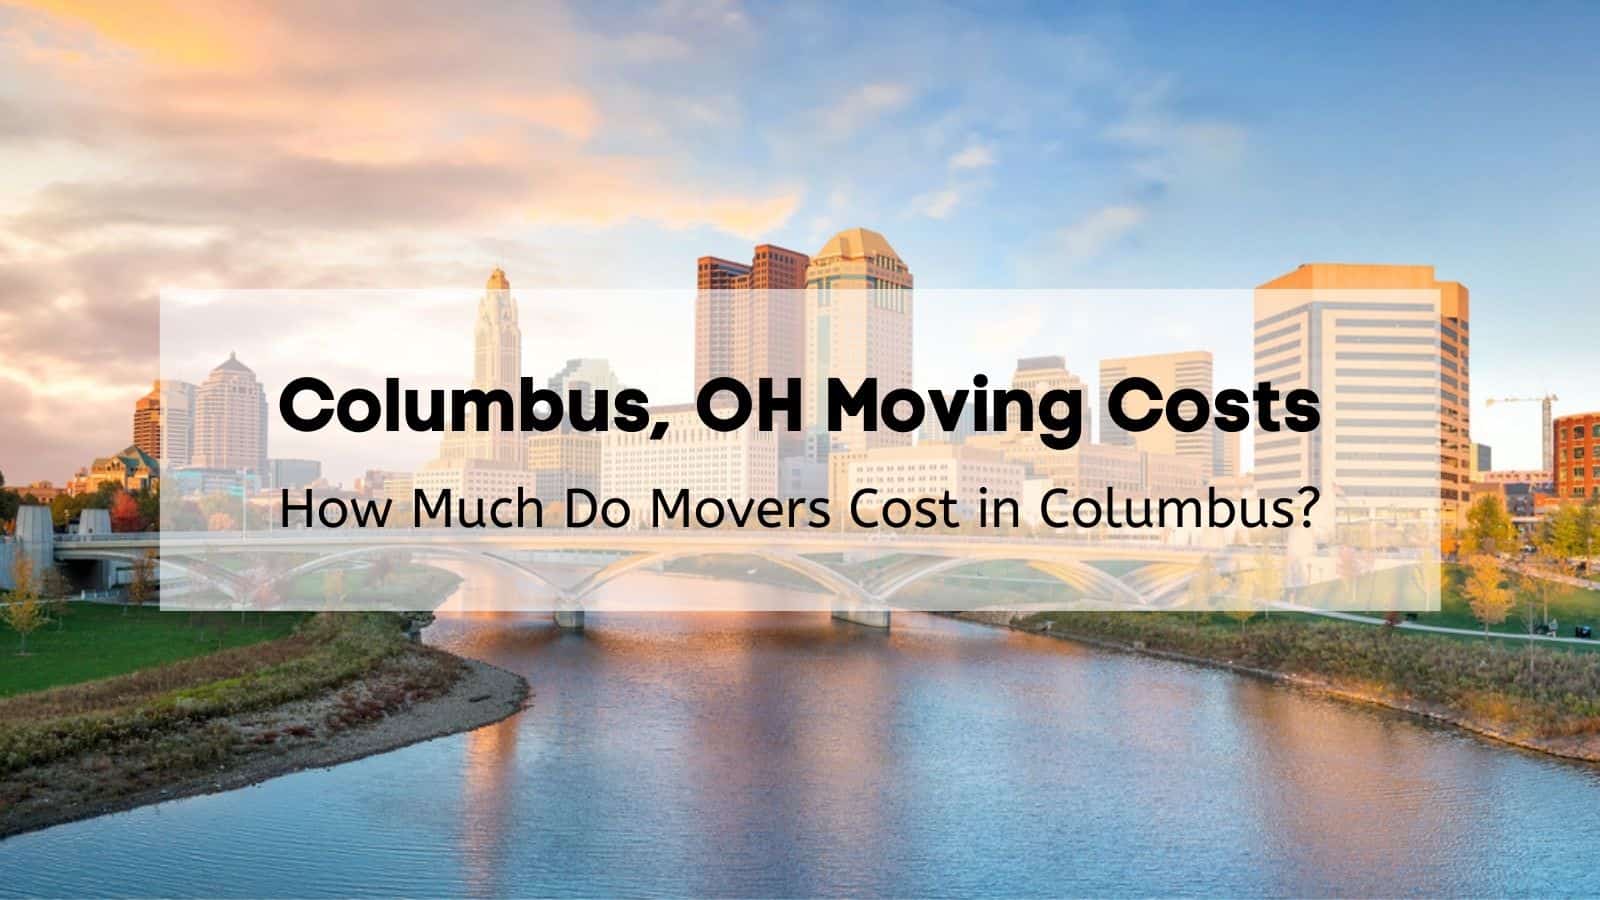 Columbus, OH Moving Costs - How much do movers cost in Columbus?